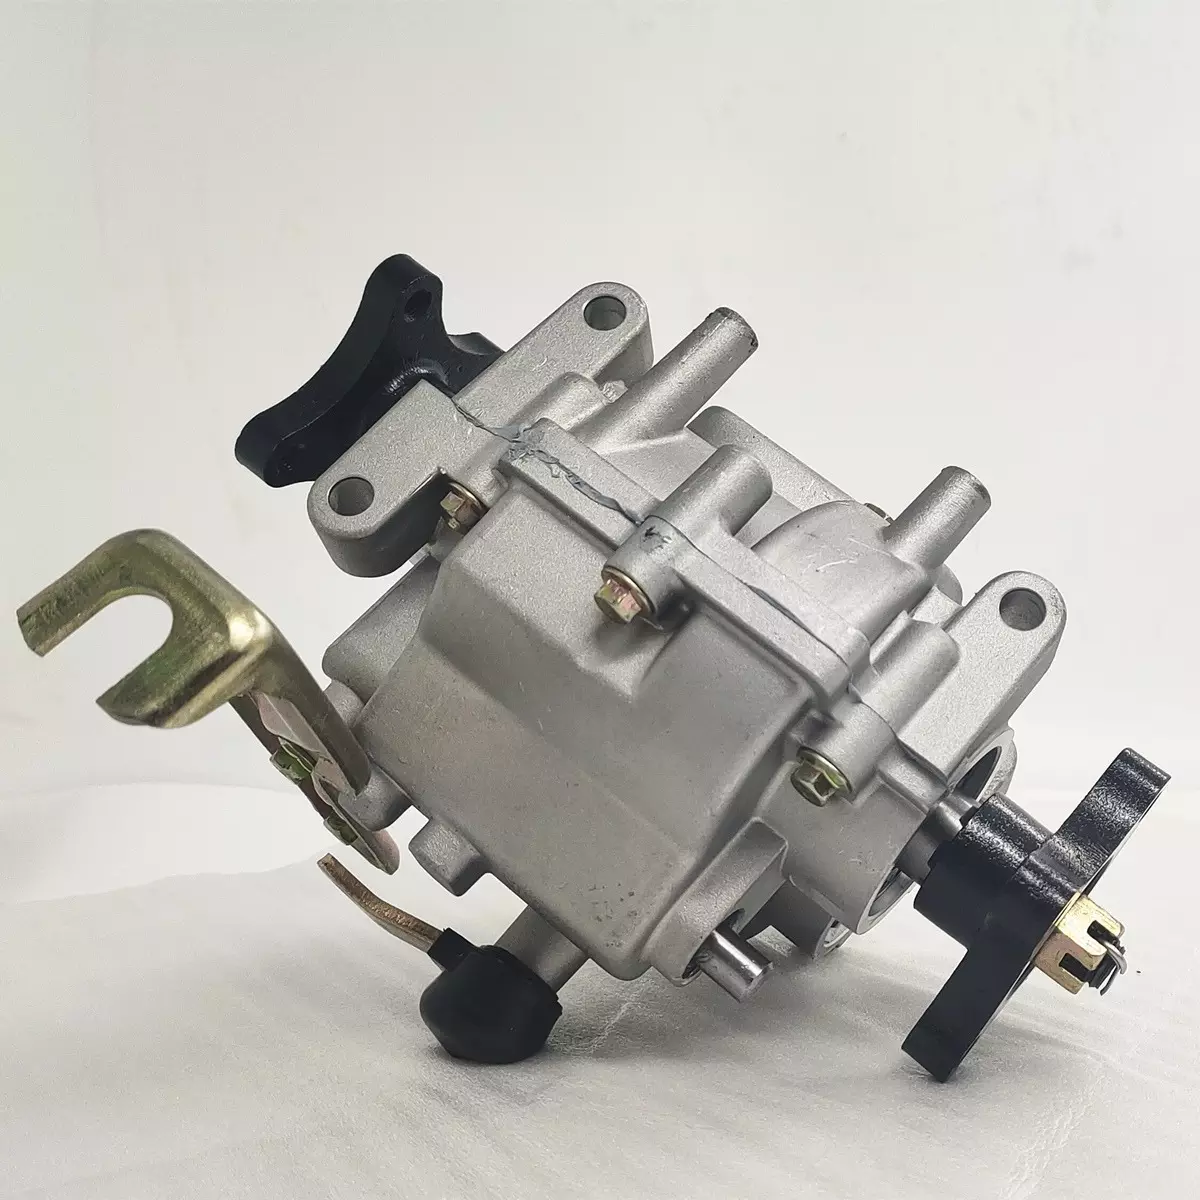 DAYANG High Quality 2-speed  transmission type Aluminum alloy housing  ratio 1.00 1.862 Origin CCC made in China